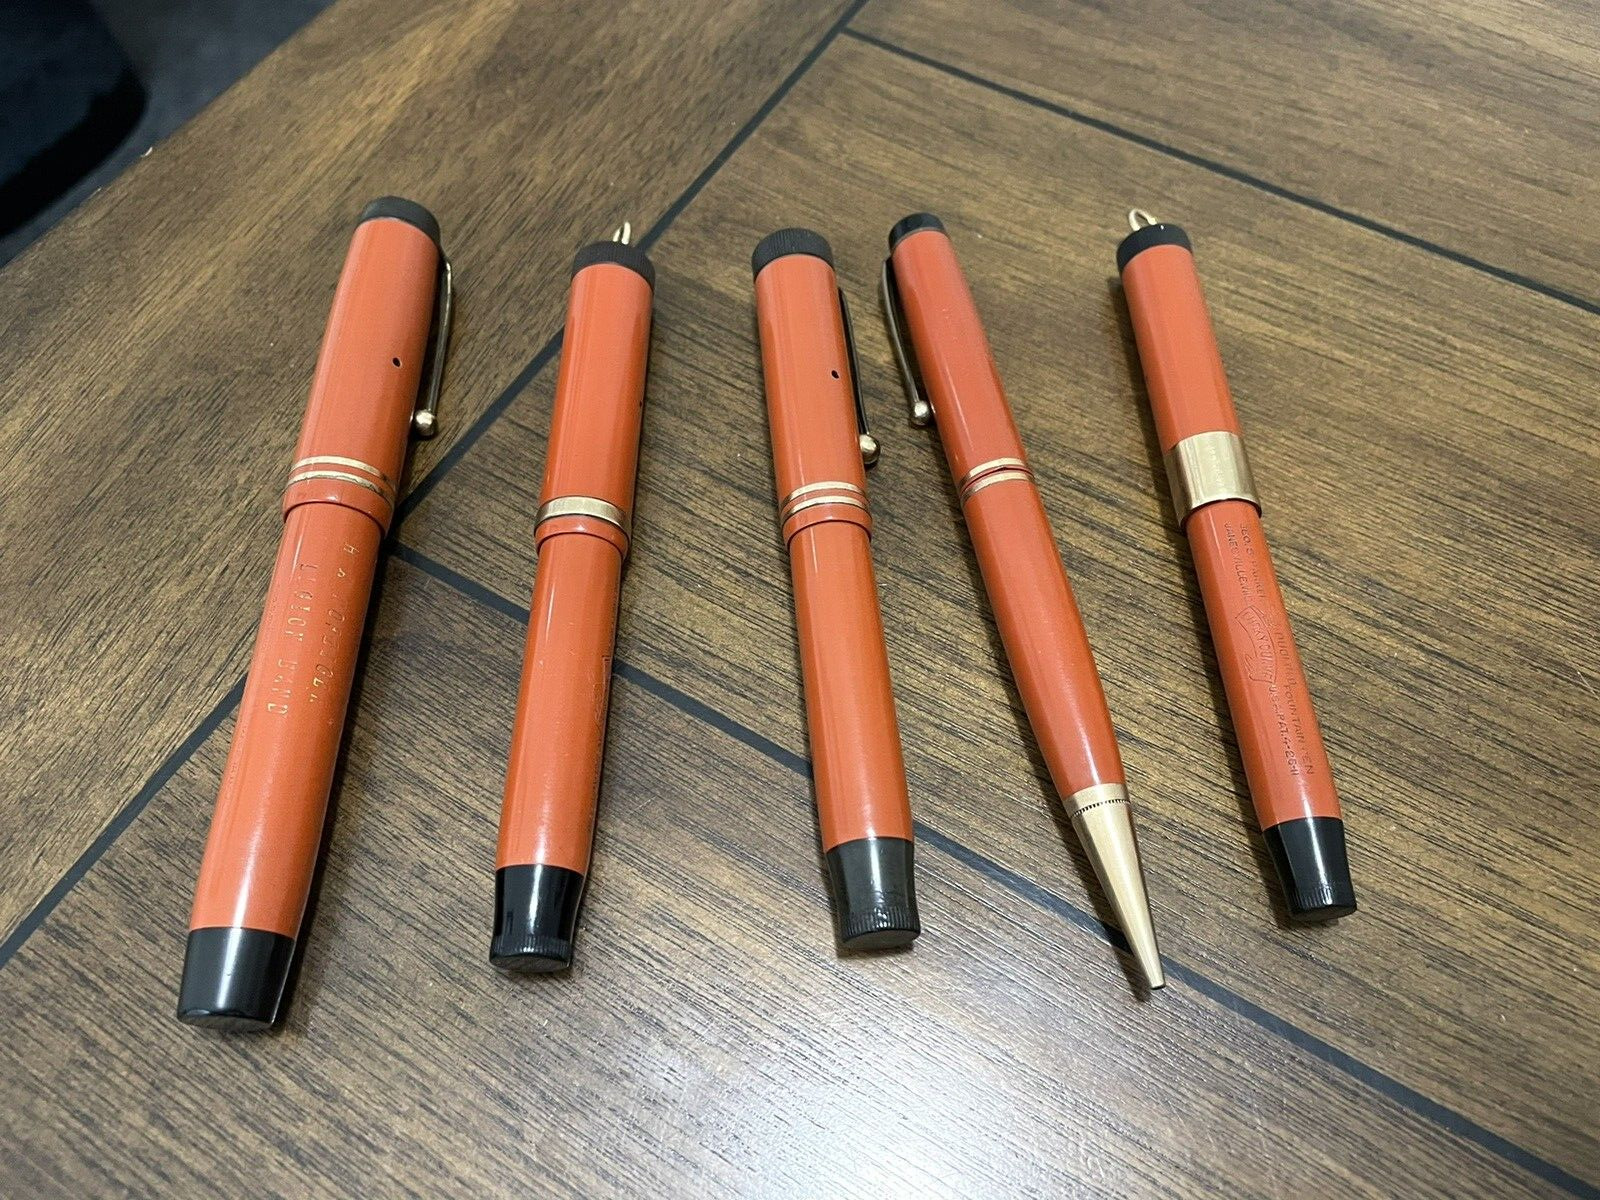 5 VINTAGE PARKER LUCKY CURVE DUOFOLD FOUNTAIN PENS-PENCIL, BIG RED SR+JR+LADY